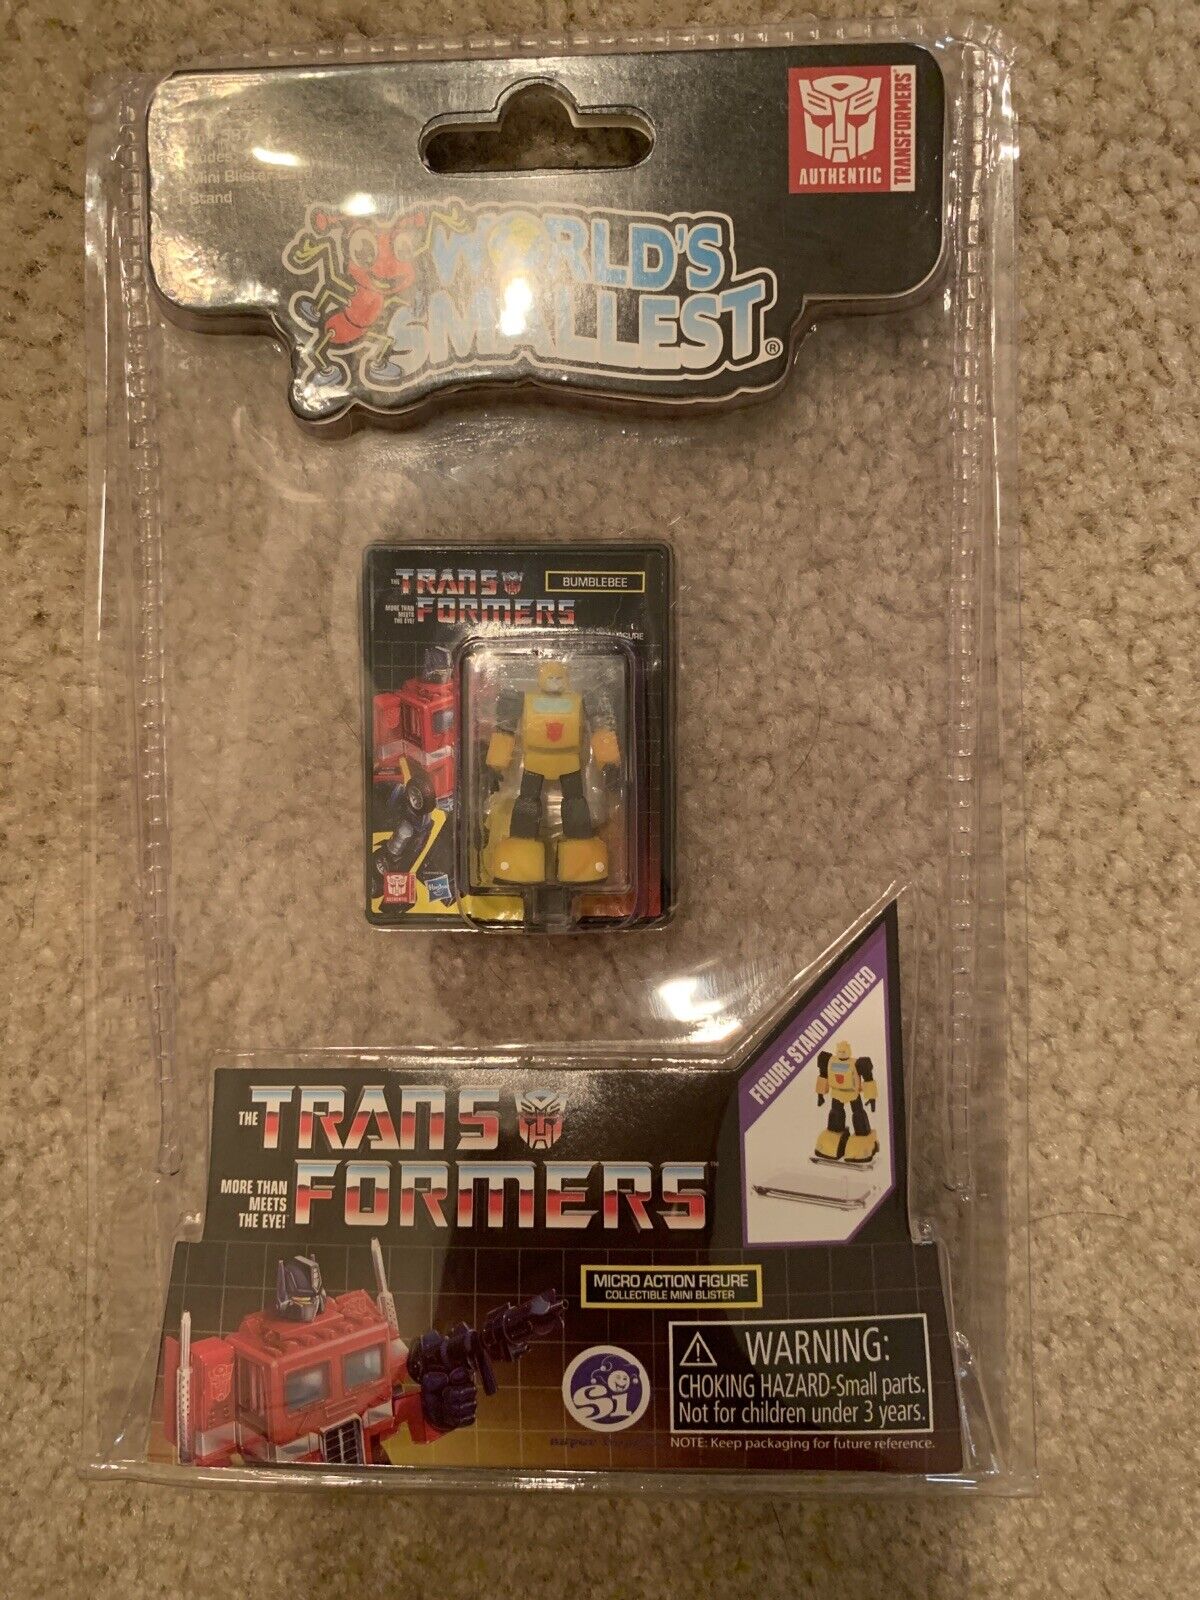 WORLDS SMALLEST TRANSFORMERS BUMBLEBEE IN HAND!!